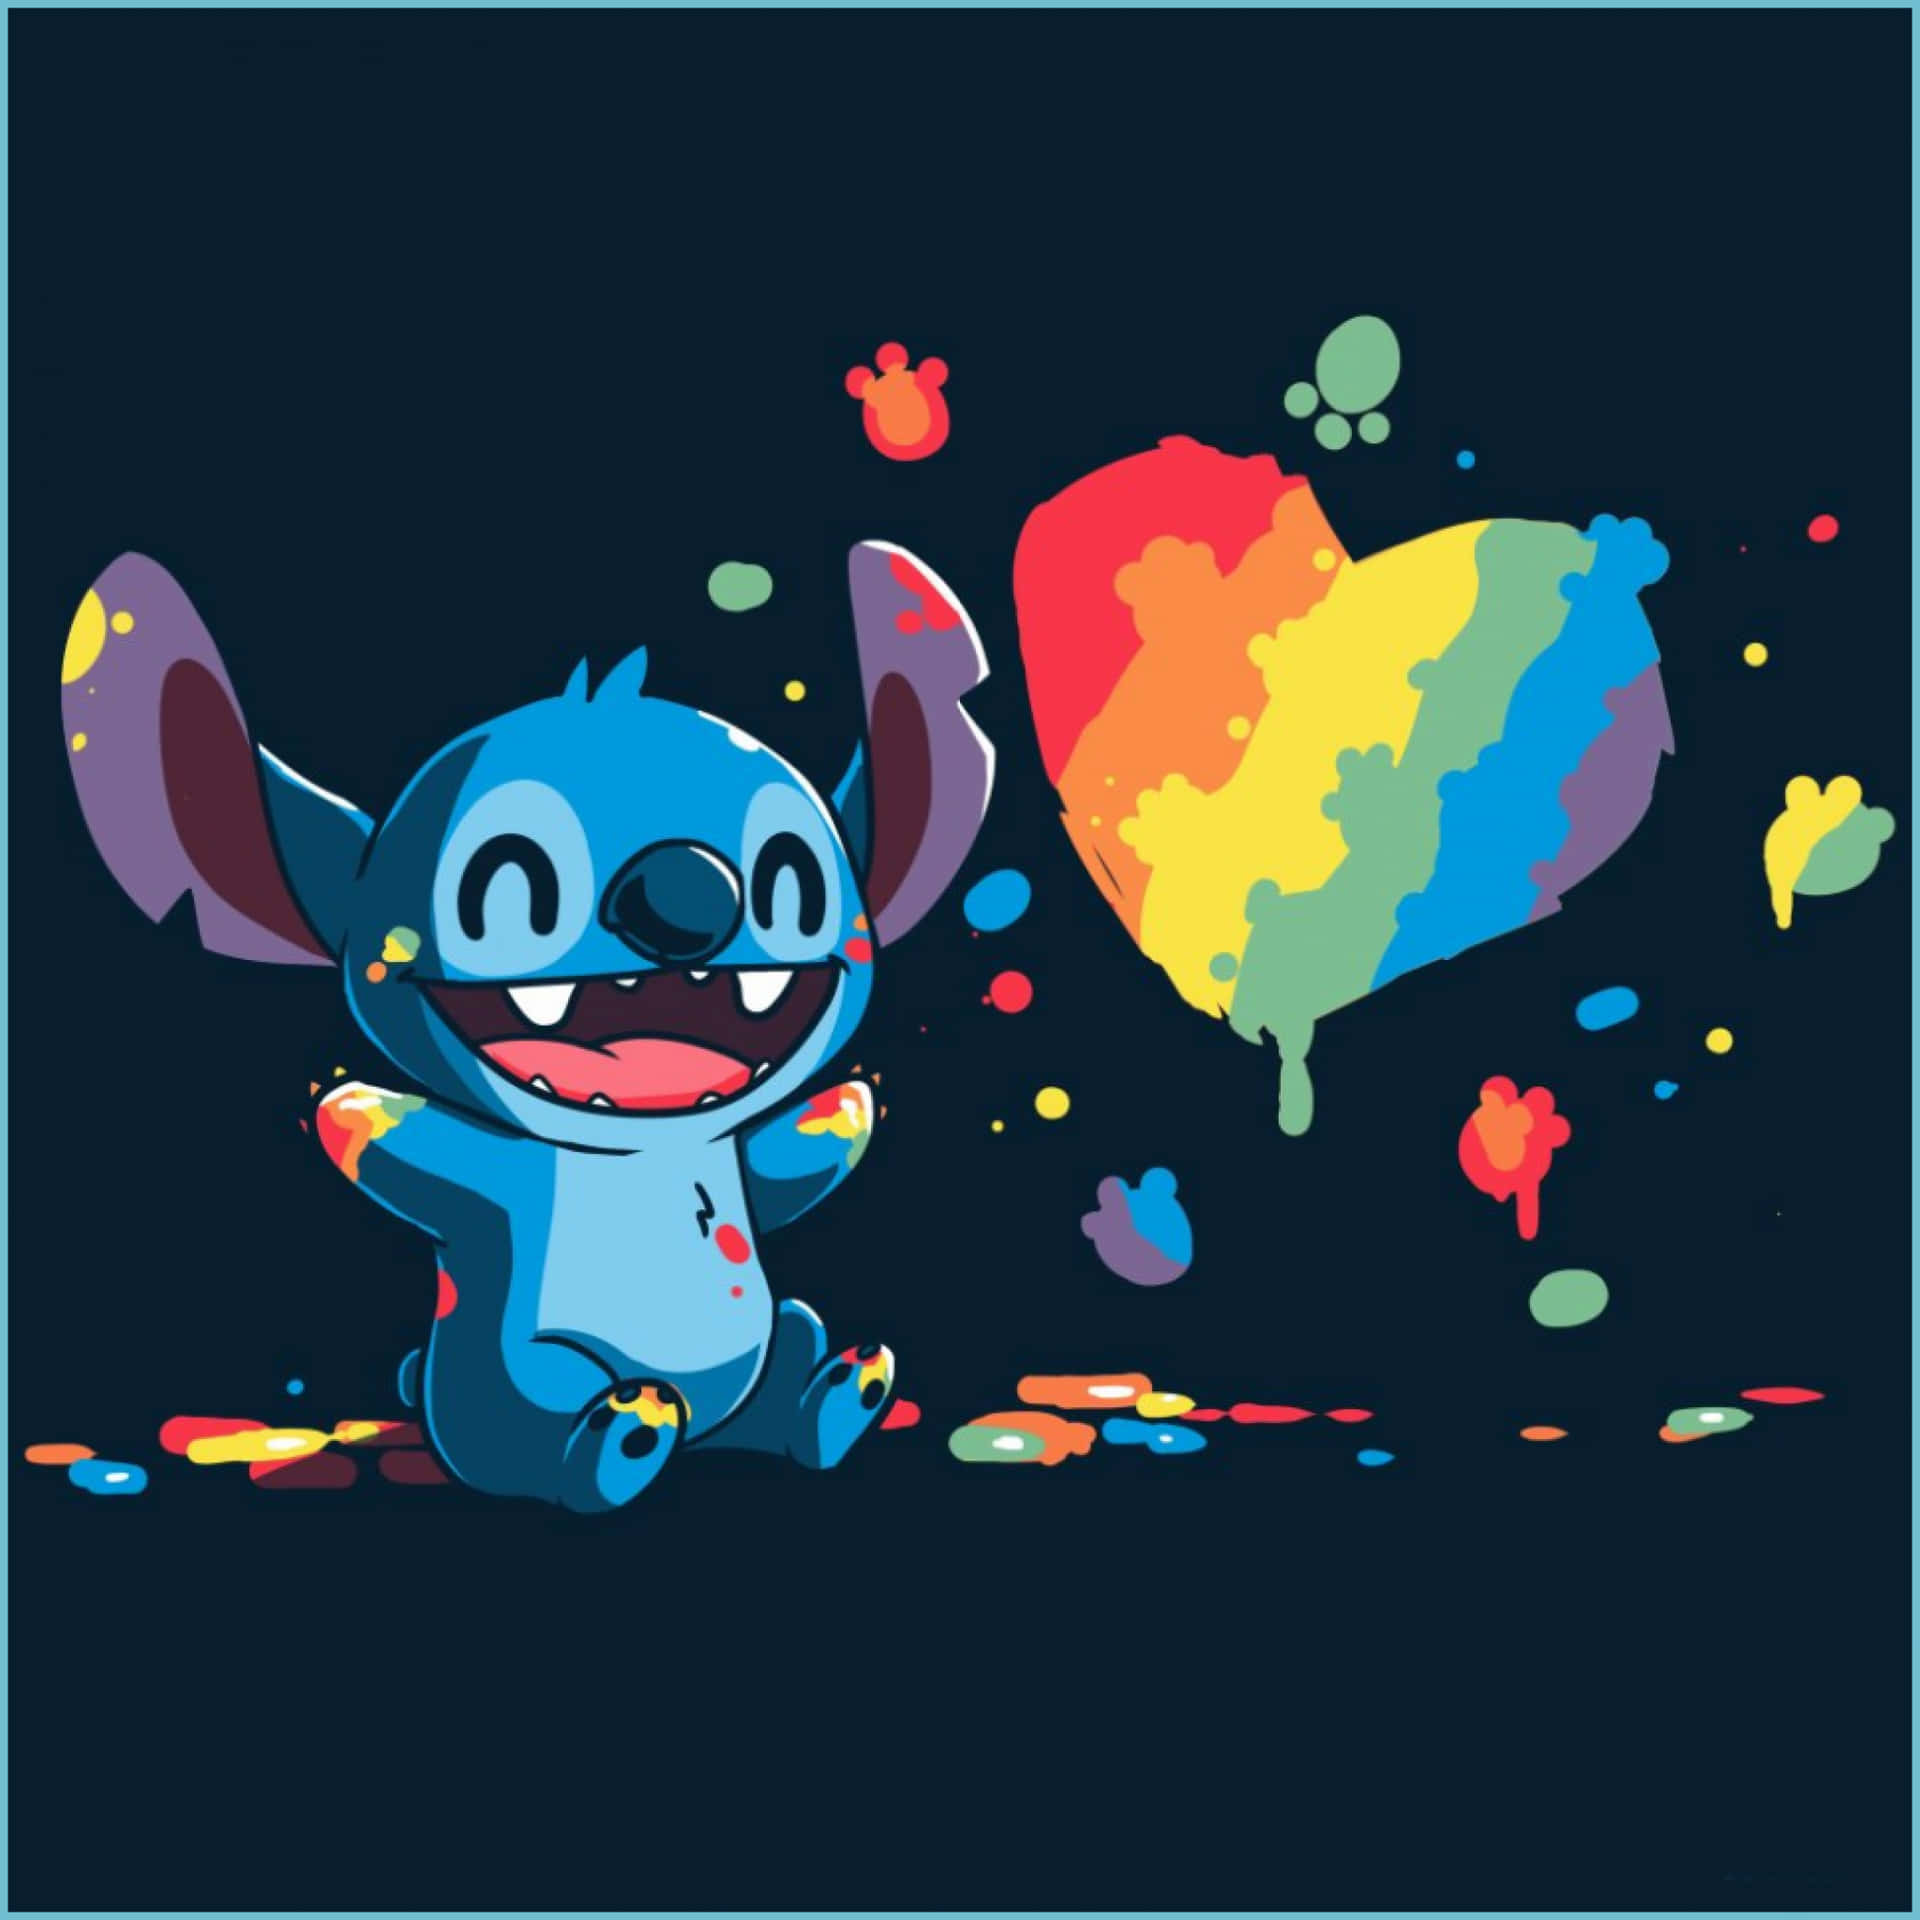 100+] Adorable Stitch Wallpapers | Wallpapers.com